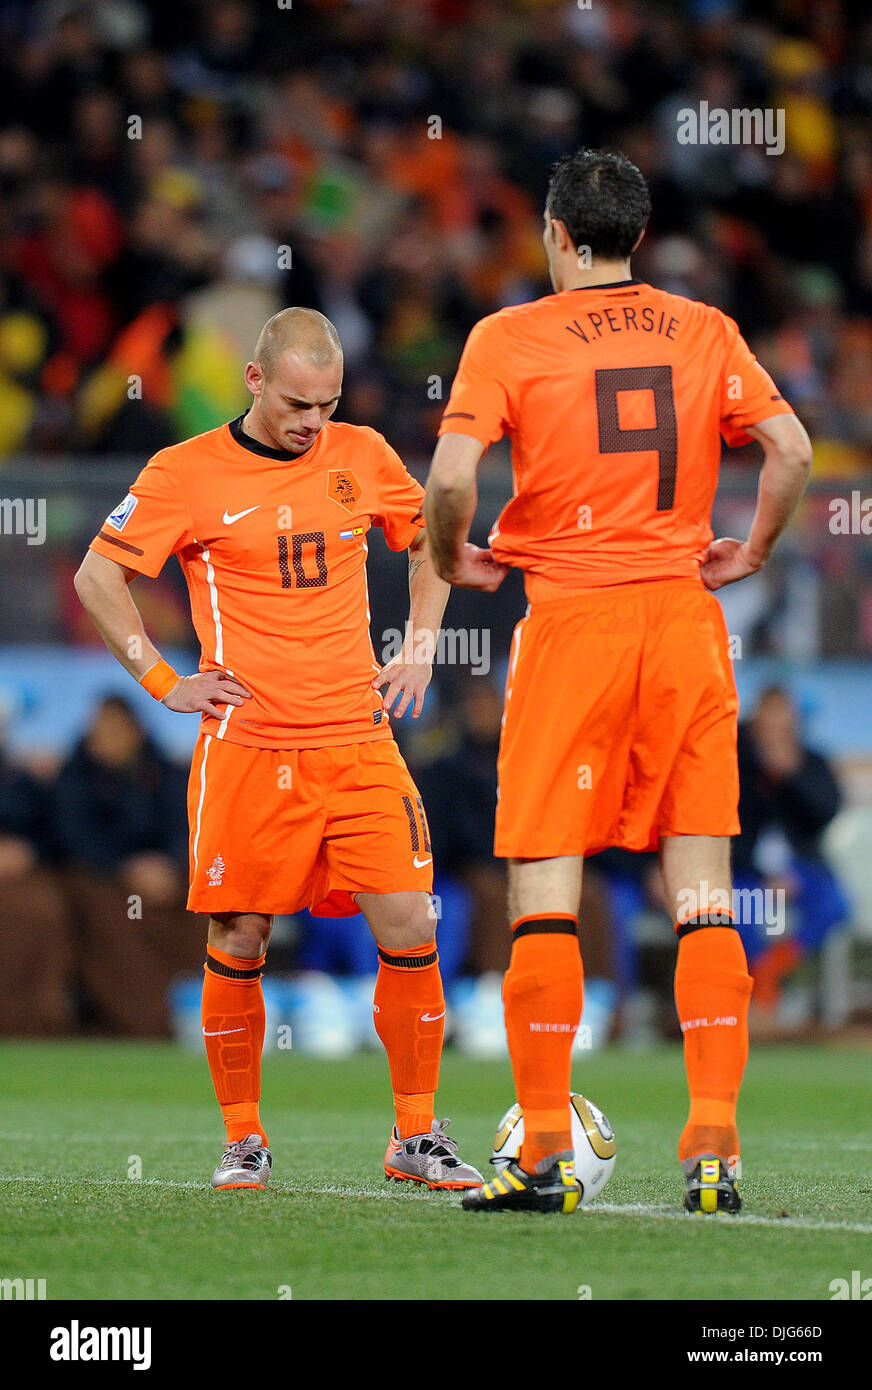 July 11, 2010 - Johannesburg, South Africa - Wesley Sneijder and Robin Van Persie of Netherlands react during the 2010 FIFA World Cup Final soccer match between Netherlands and Spain at Soccer City Stadium on July 11, 2010 in Johannesburg, South Africa. (Credit Image: © Luca Ghidoni/ZUMApress.com) Stock Photo